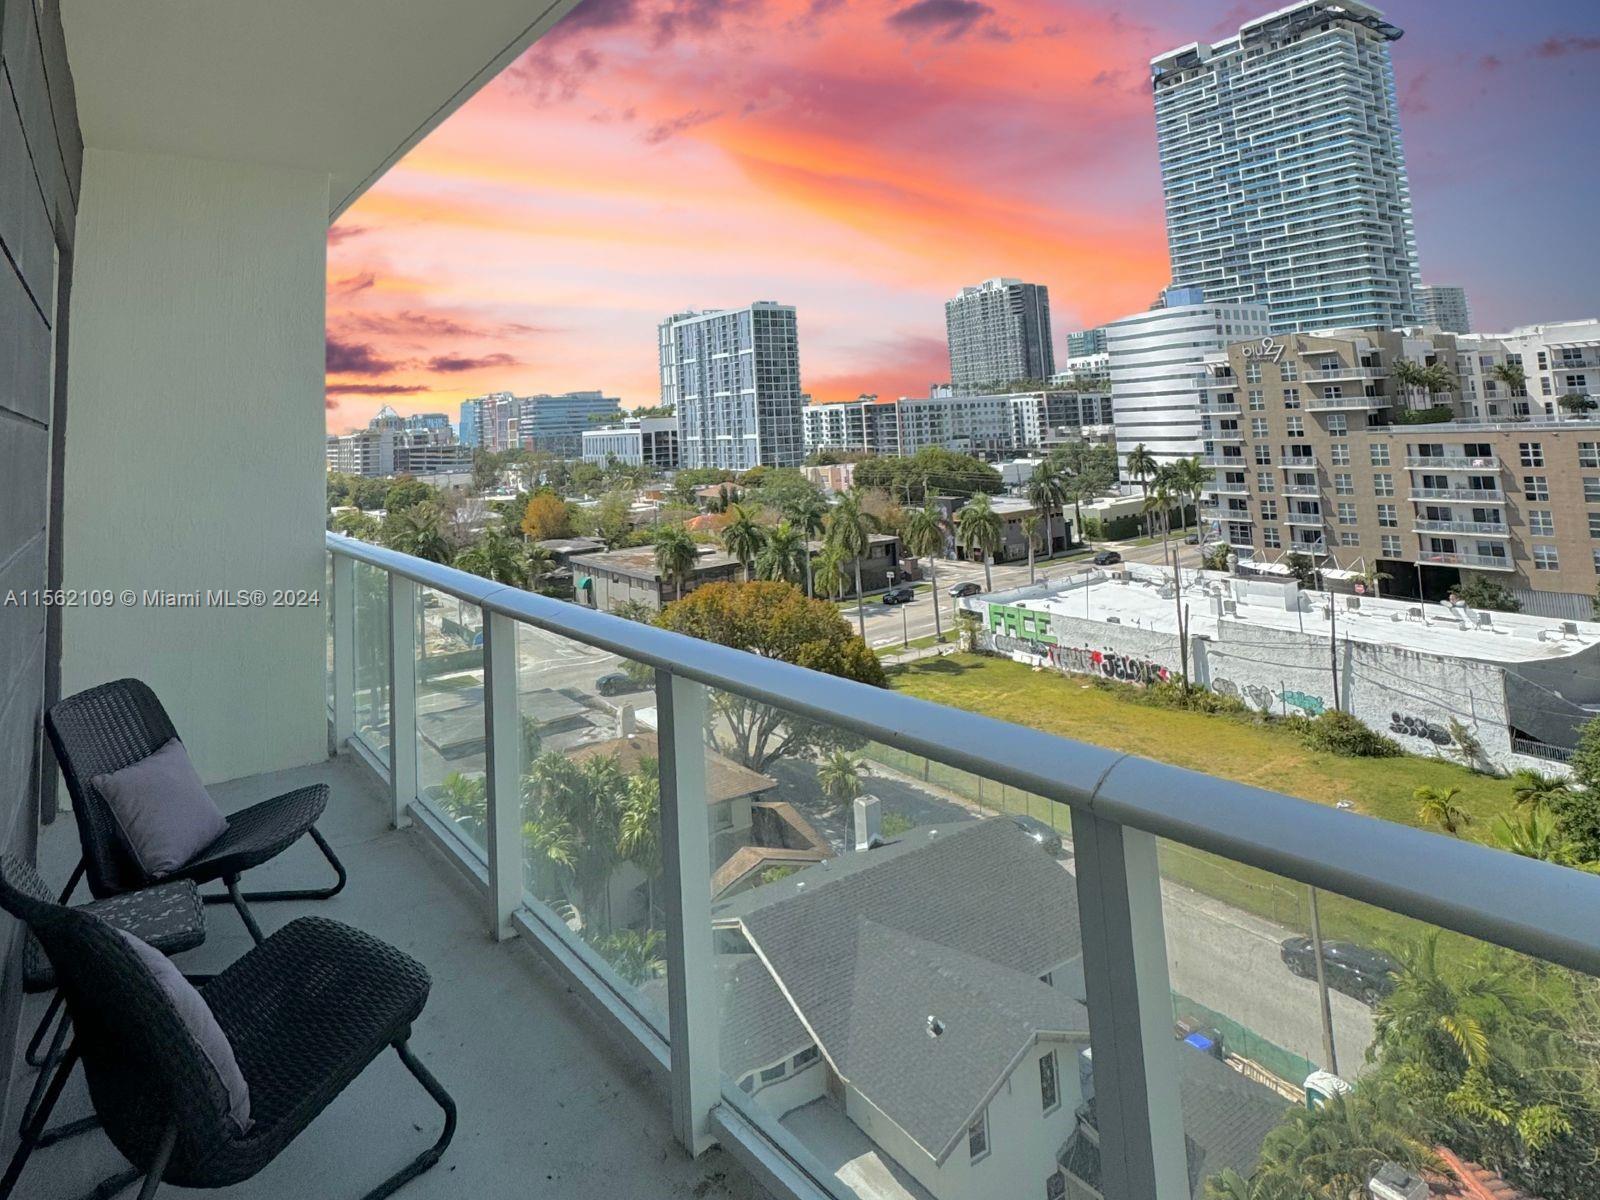 Welcome to the vibrant neighborhood of Edgewater in Miami! This stunning condo comes fully furnished and fully equipped. Ideal for convenience, comfort, & captures the essence of modern luxury living. Enjoy invigorating sunrises and relaxing sunsets from your balcony while providing breathtaking views. Amenities that will truly elevate your lifestyle. The building offers an exclusive rooftop pool & equipped work out room. Location is key, you'll find yourself at the center of it all, with easy access to Midtown, Brickell, the Design District, Wynwood, & the beach. Wi-fi included, ample parking available & pet-friendly. Full-year lease preferred, seasonal rental ok. Let us help you make this dream residence a reality! Contact us today! Rapid approval!